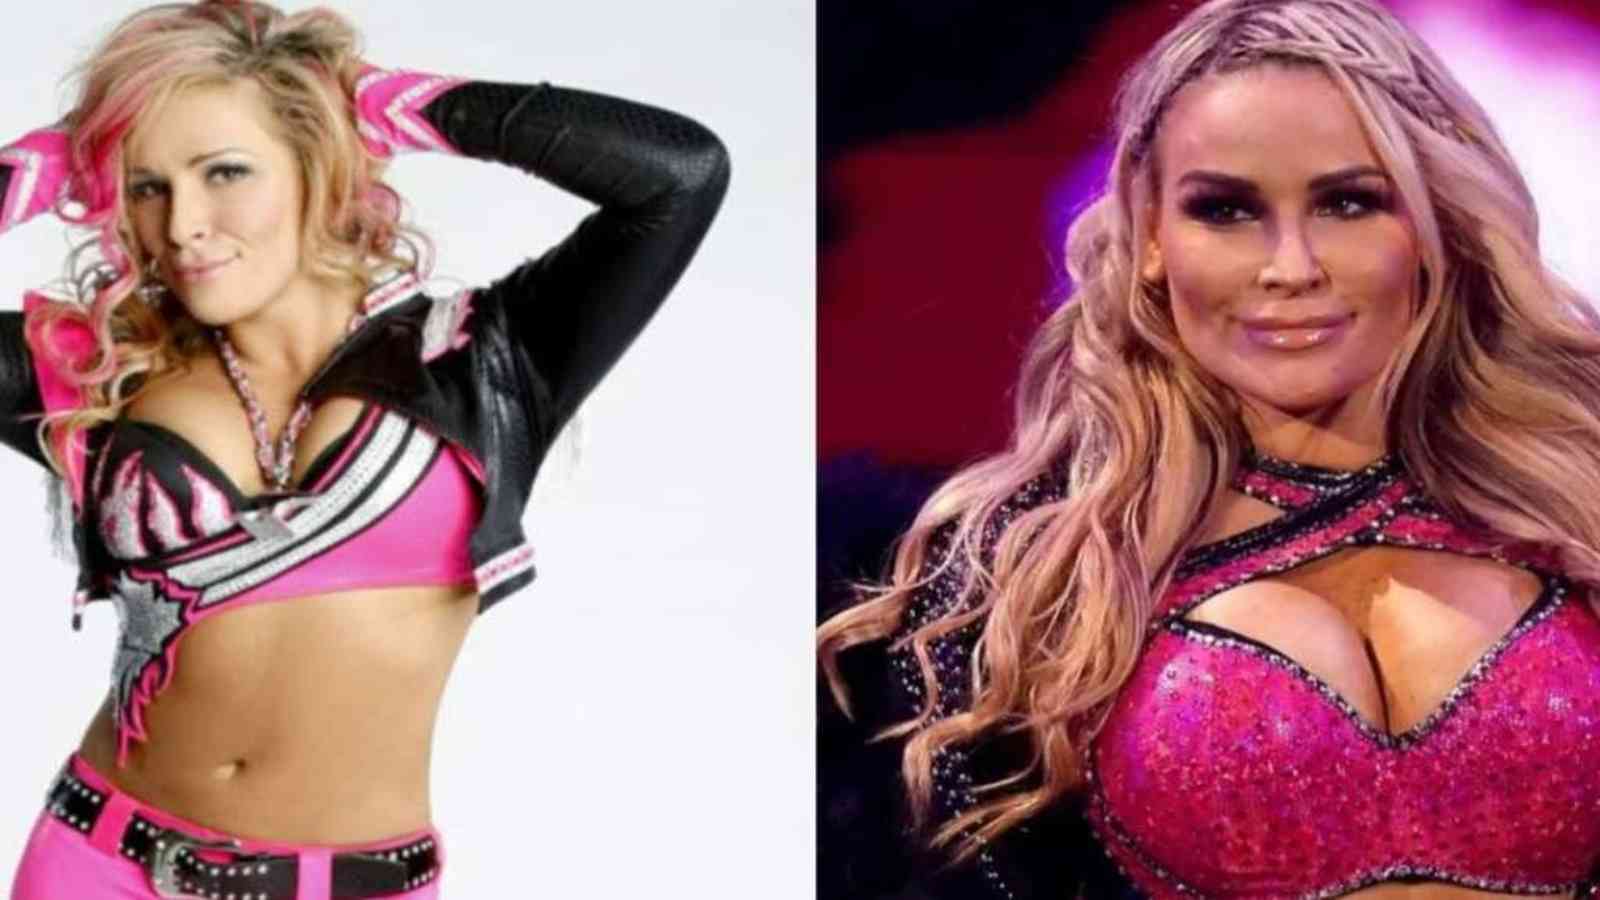 Natalya neidhart before and after